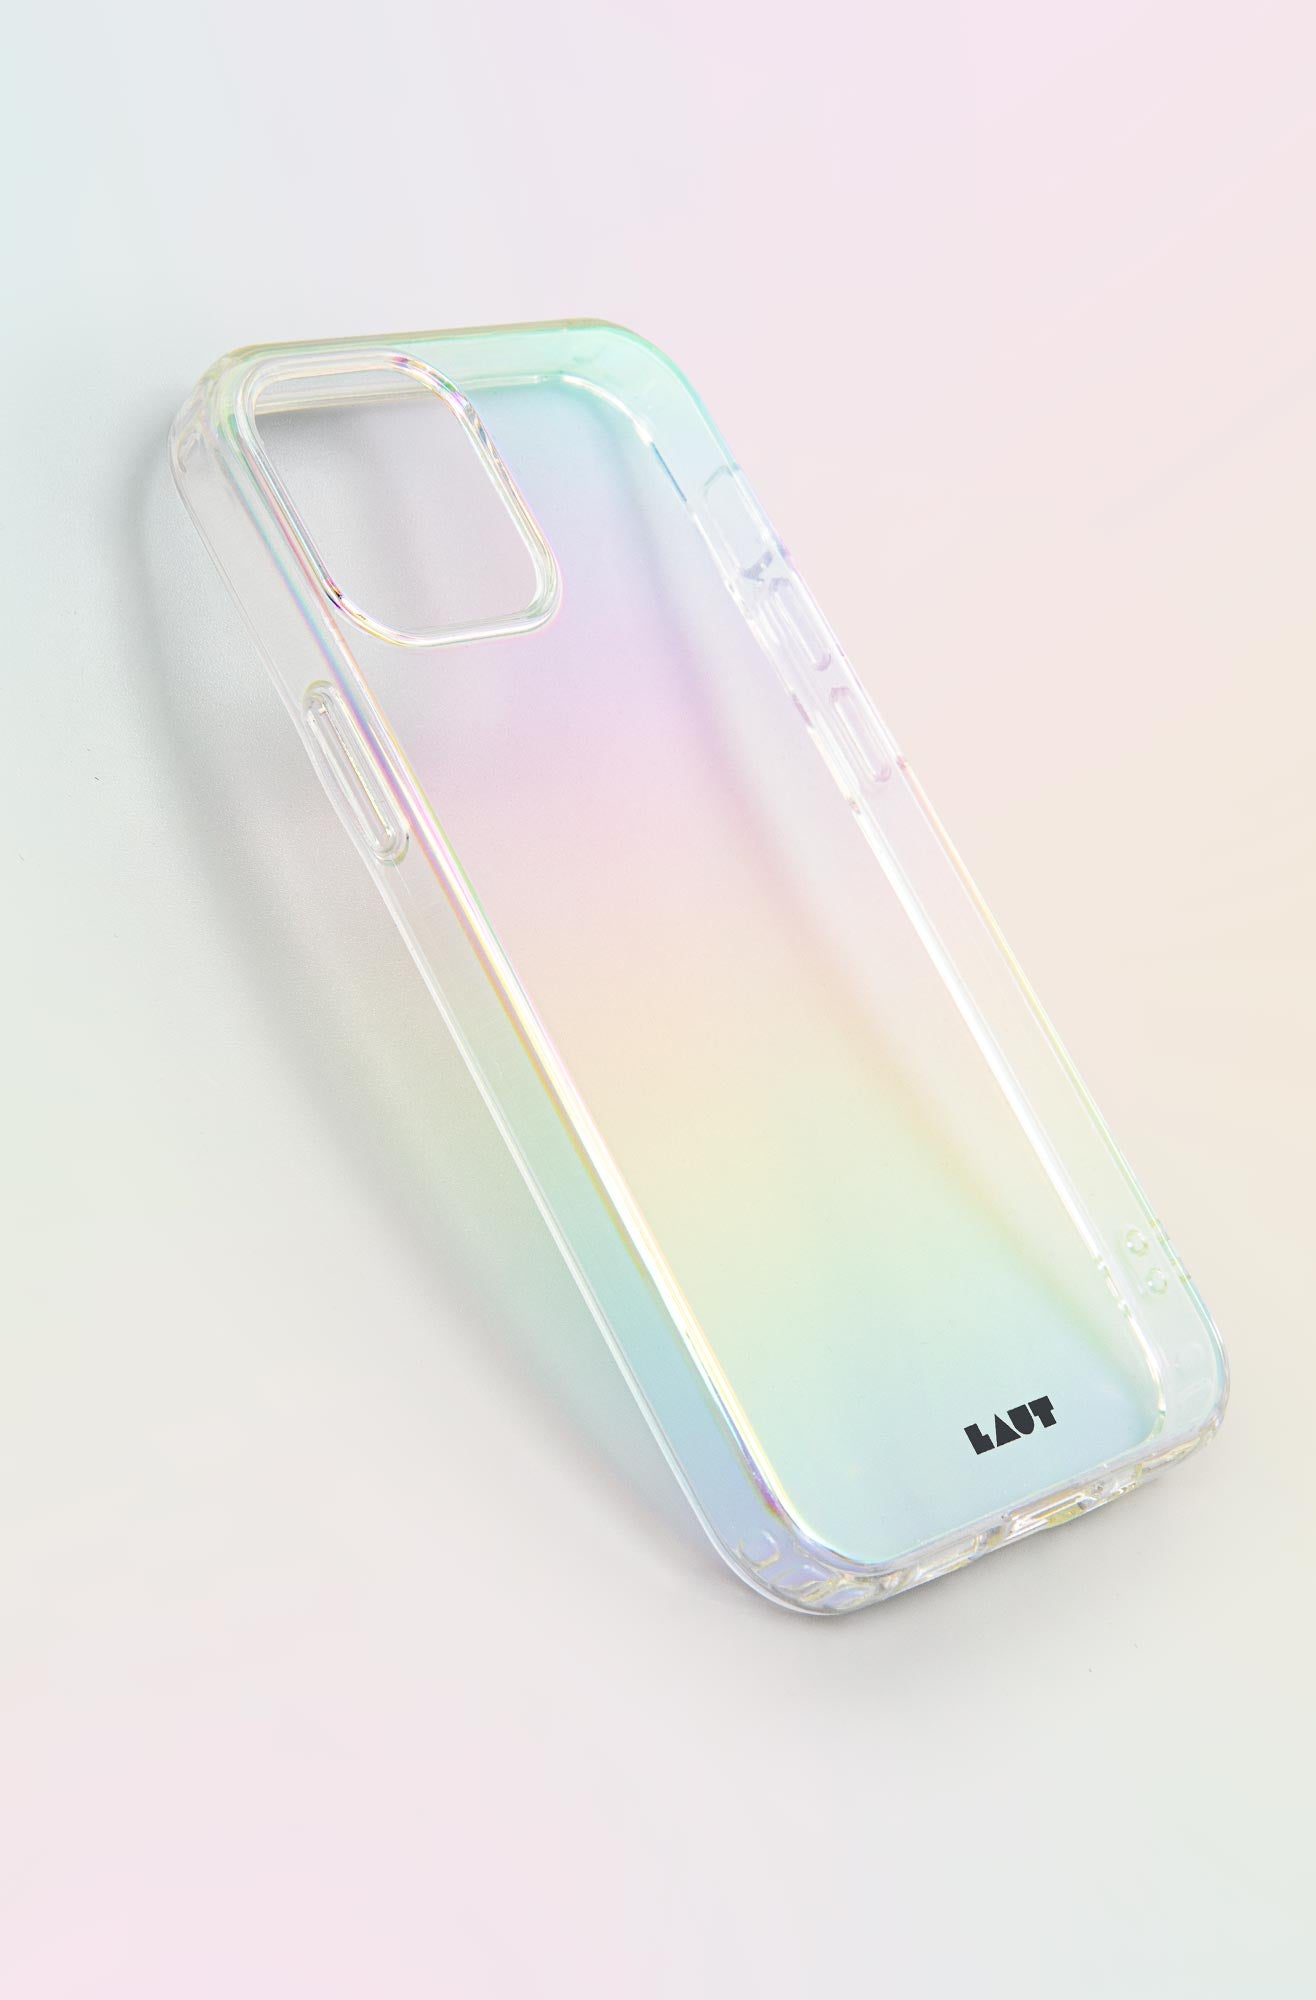 LAUT - CRYSTAL-X case for iPhone 12 series